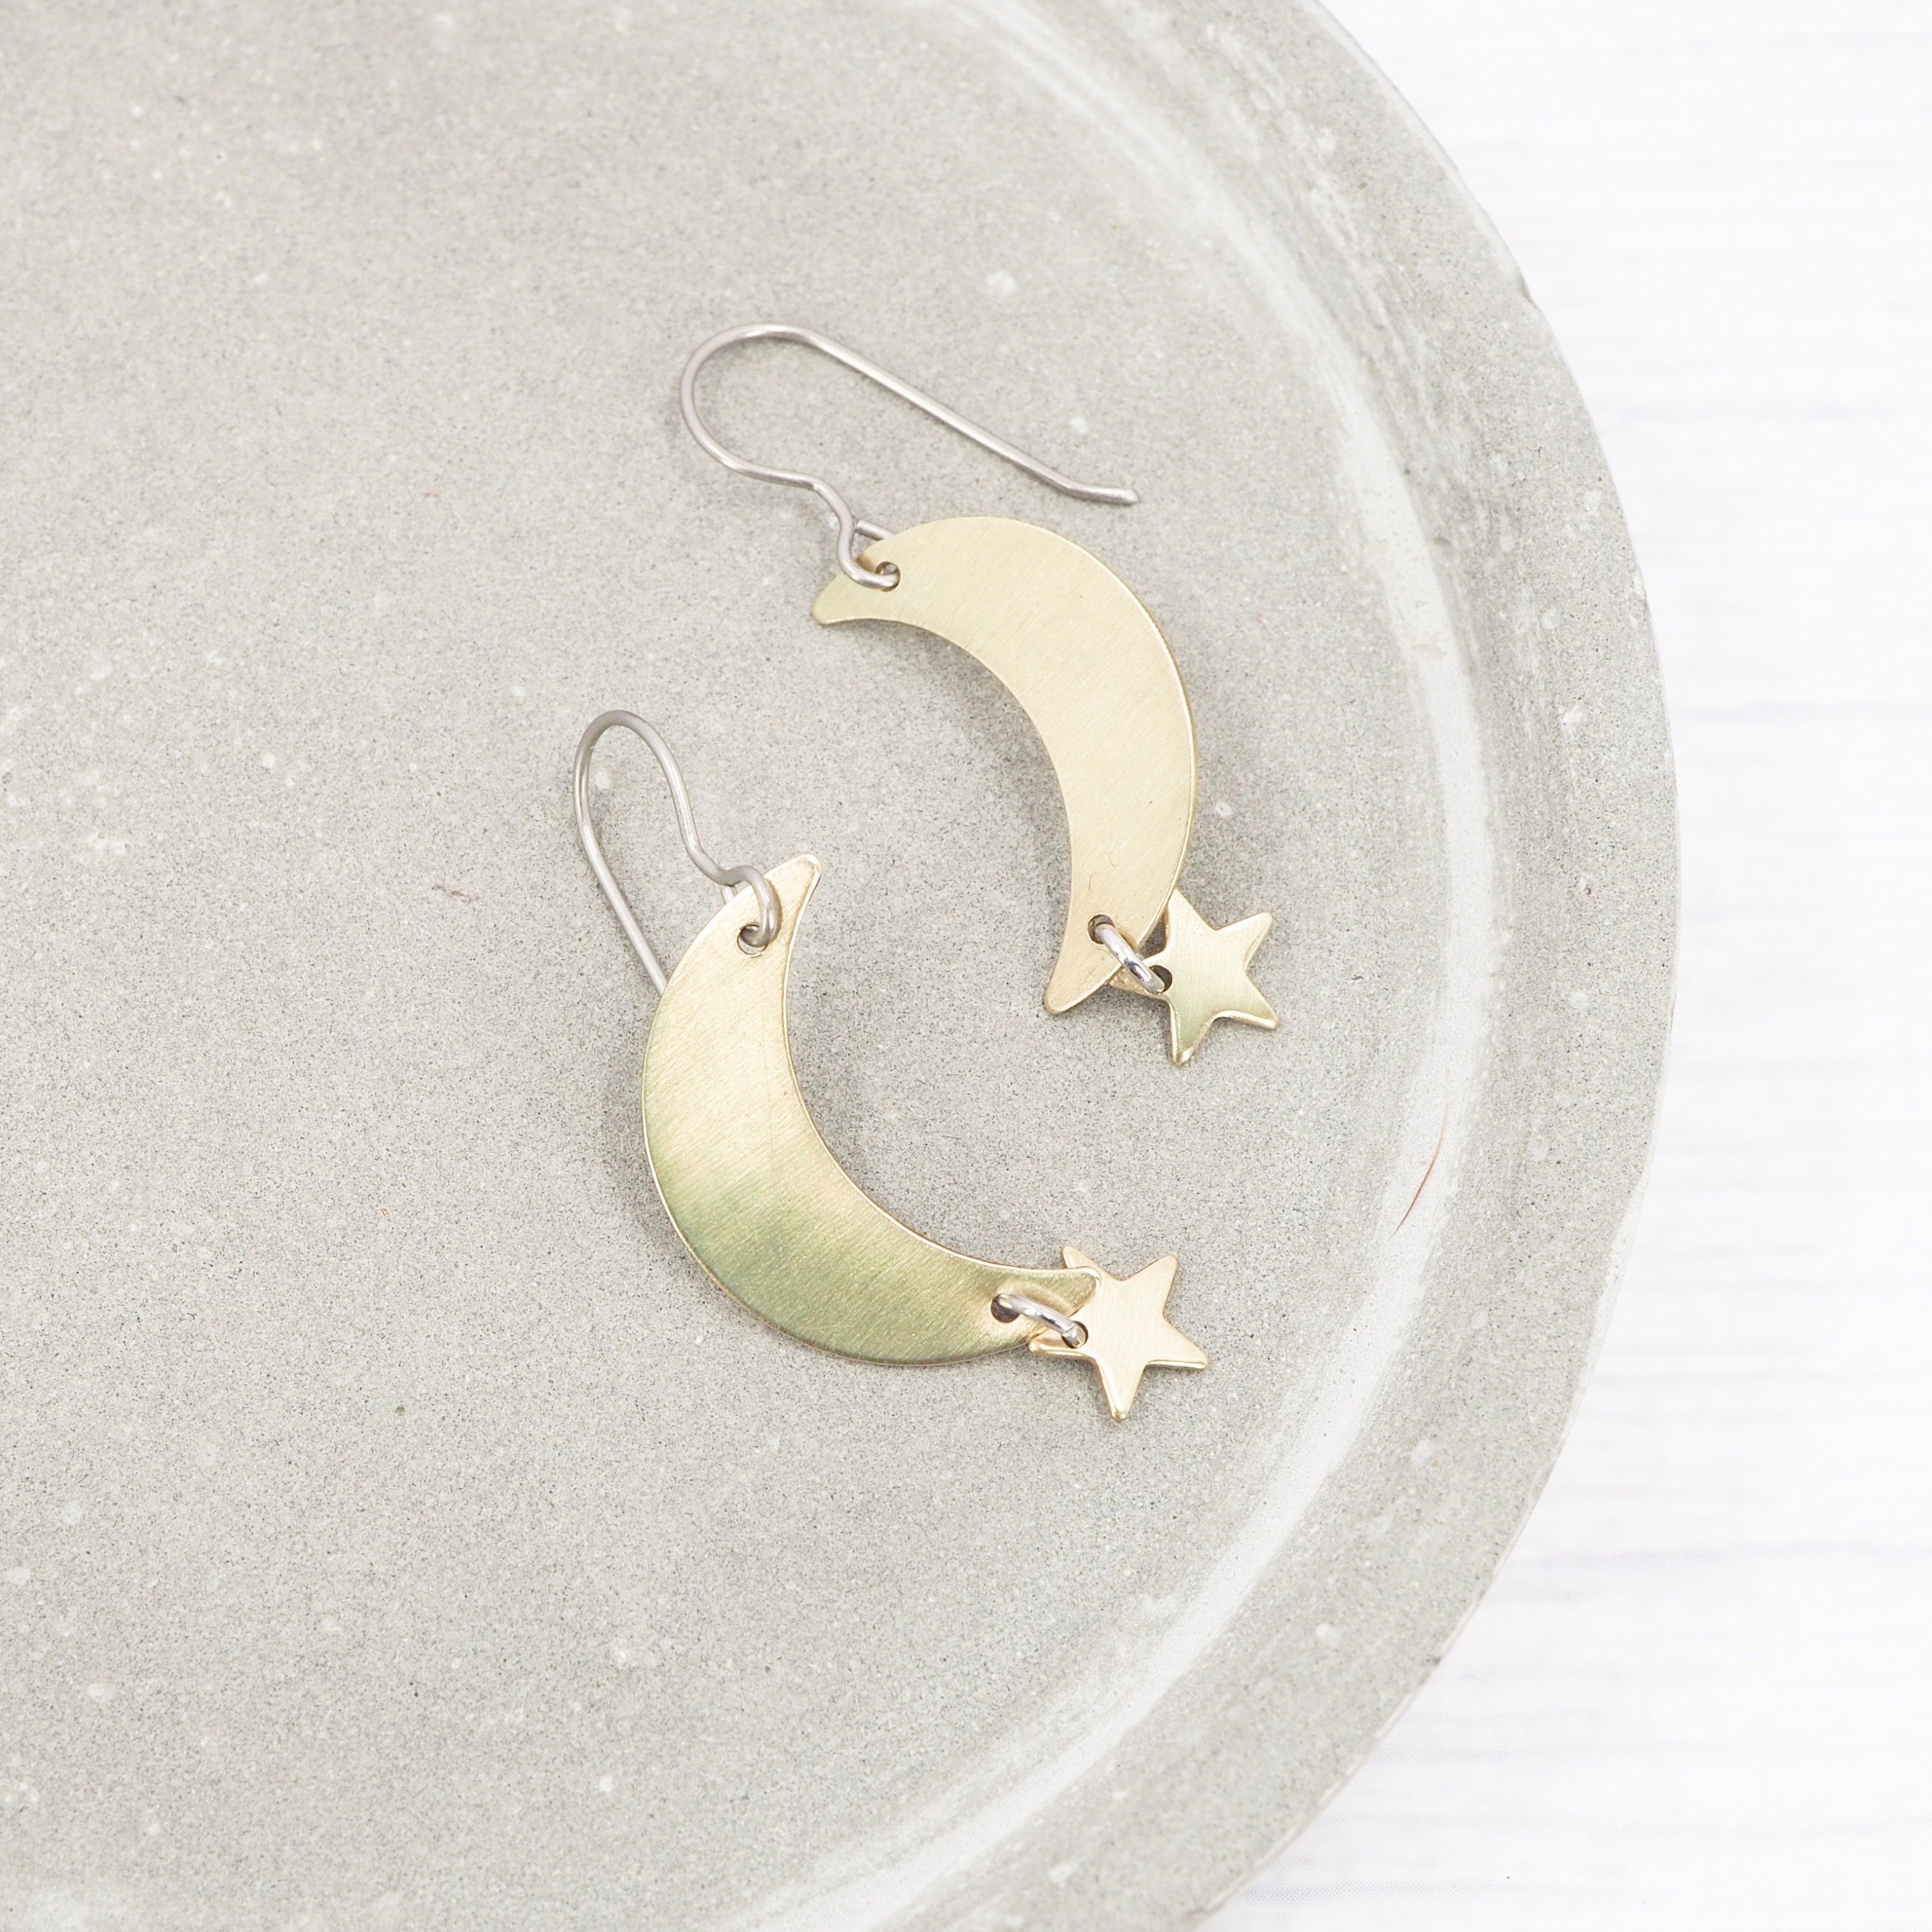 Silver Crescent Moon Dangly Earrings - made w/hypoallergenic titanium -  Grey Theory Mill